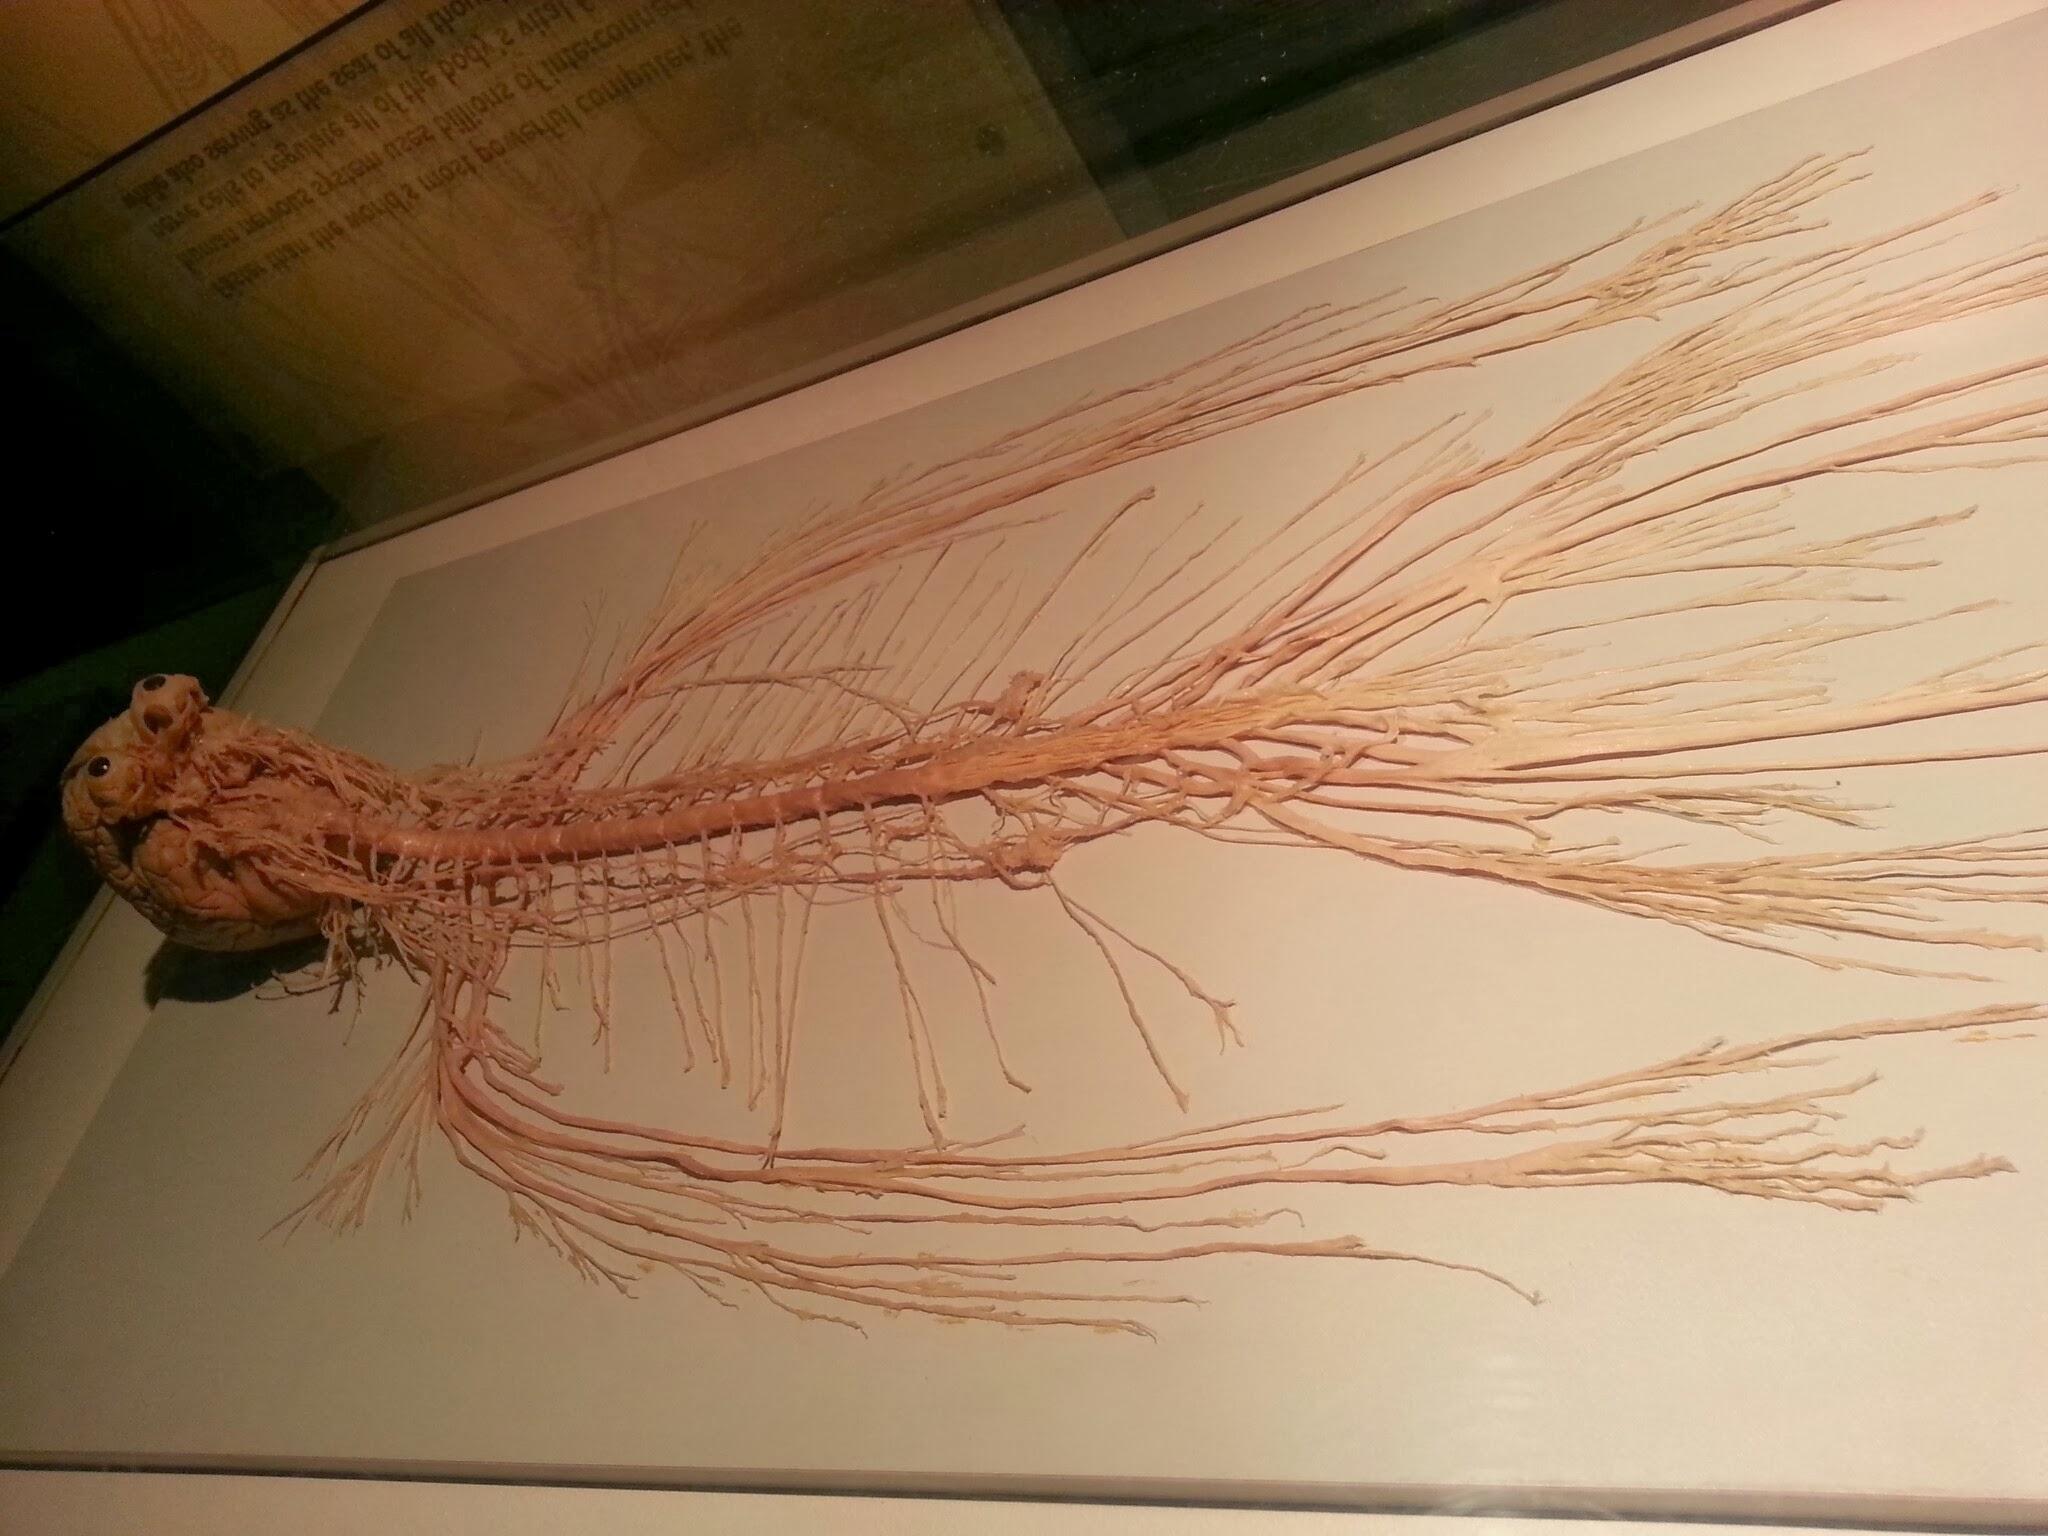 Our Nervous System